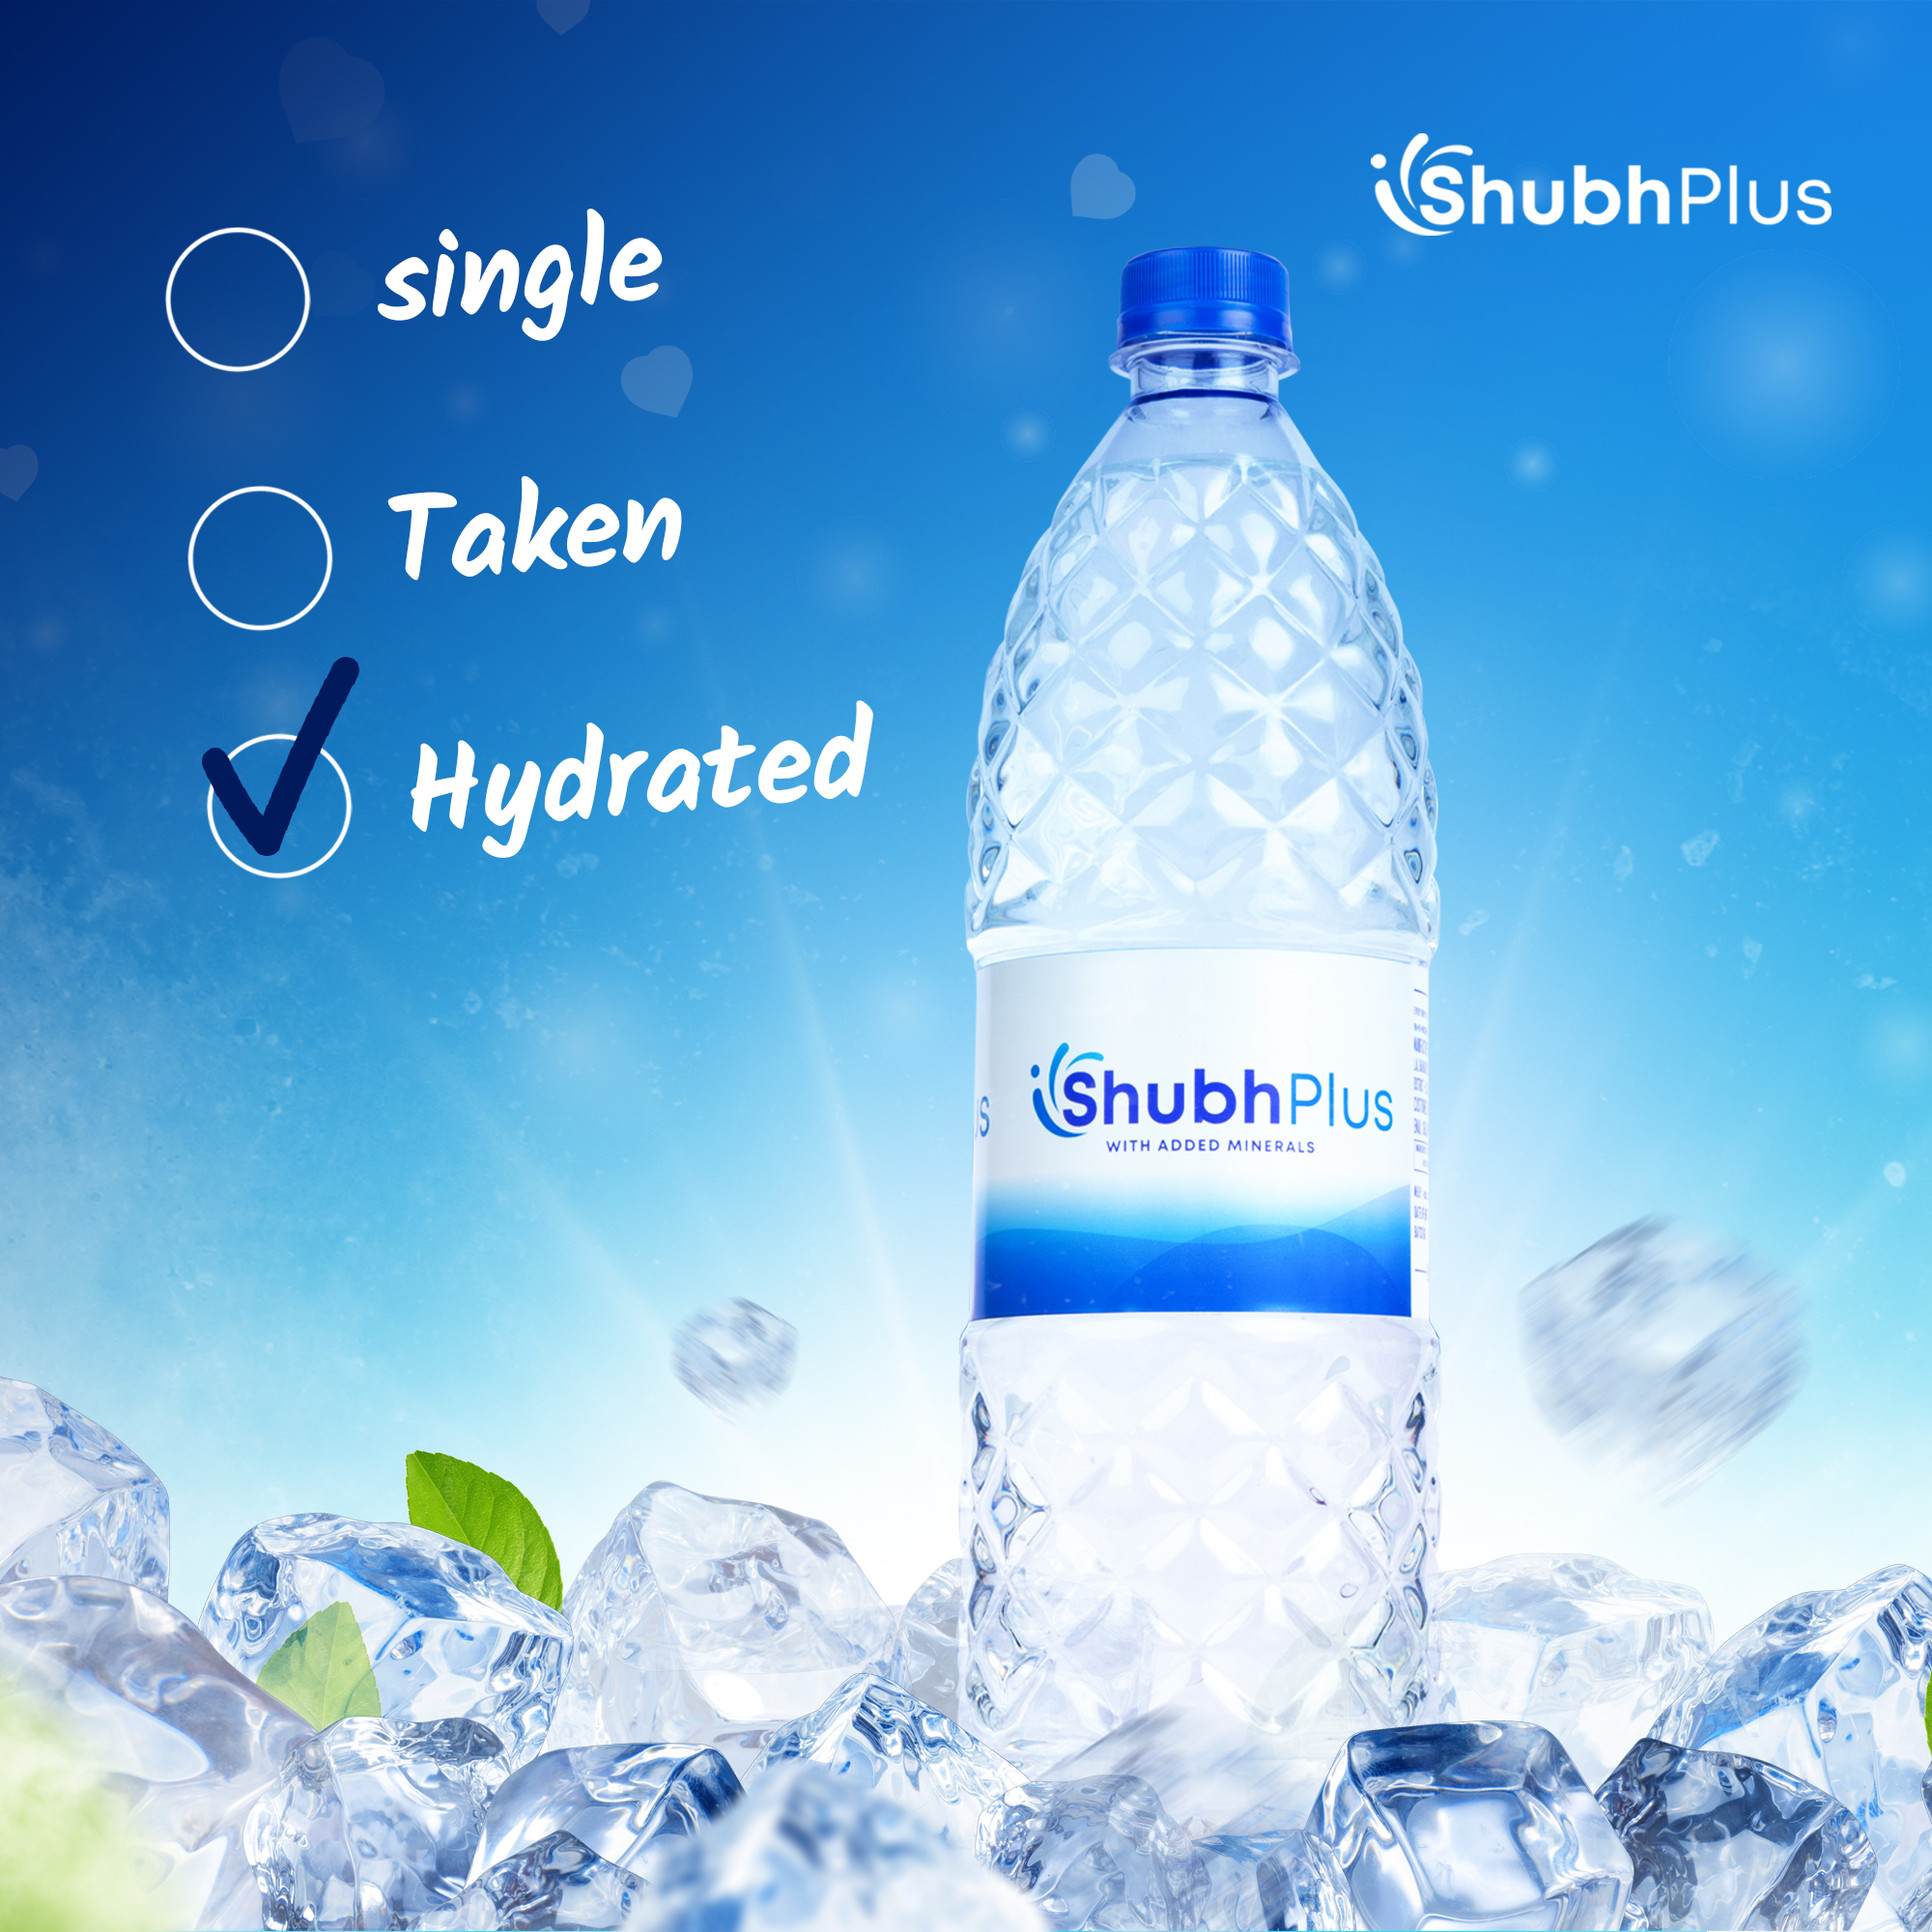 Shubhplus drinking mineral water